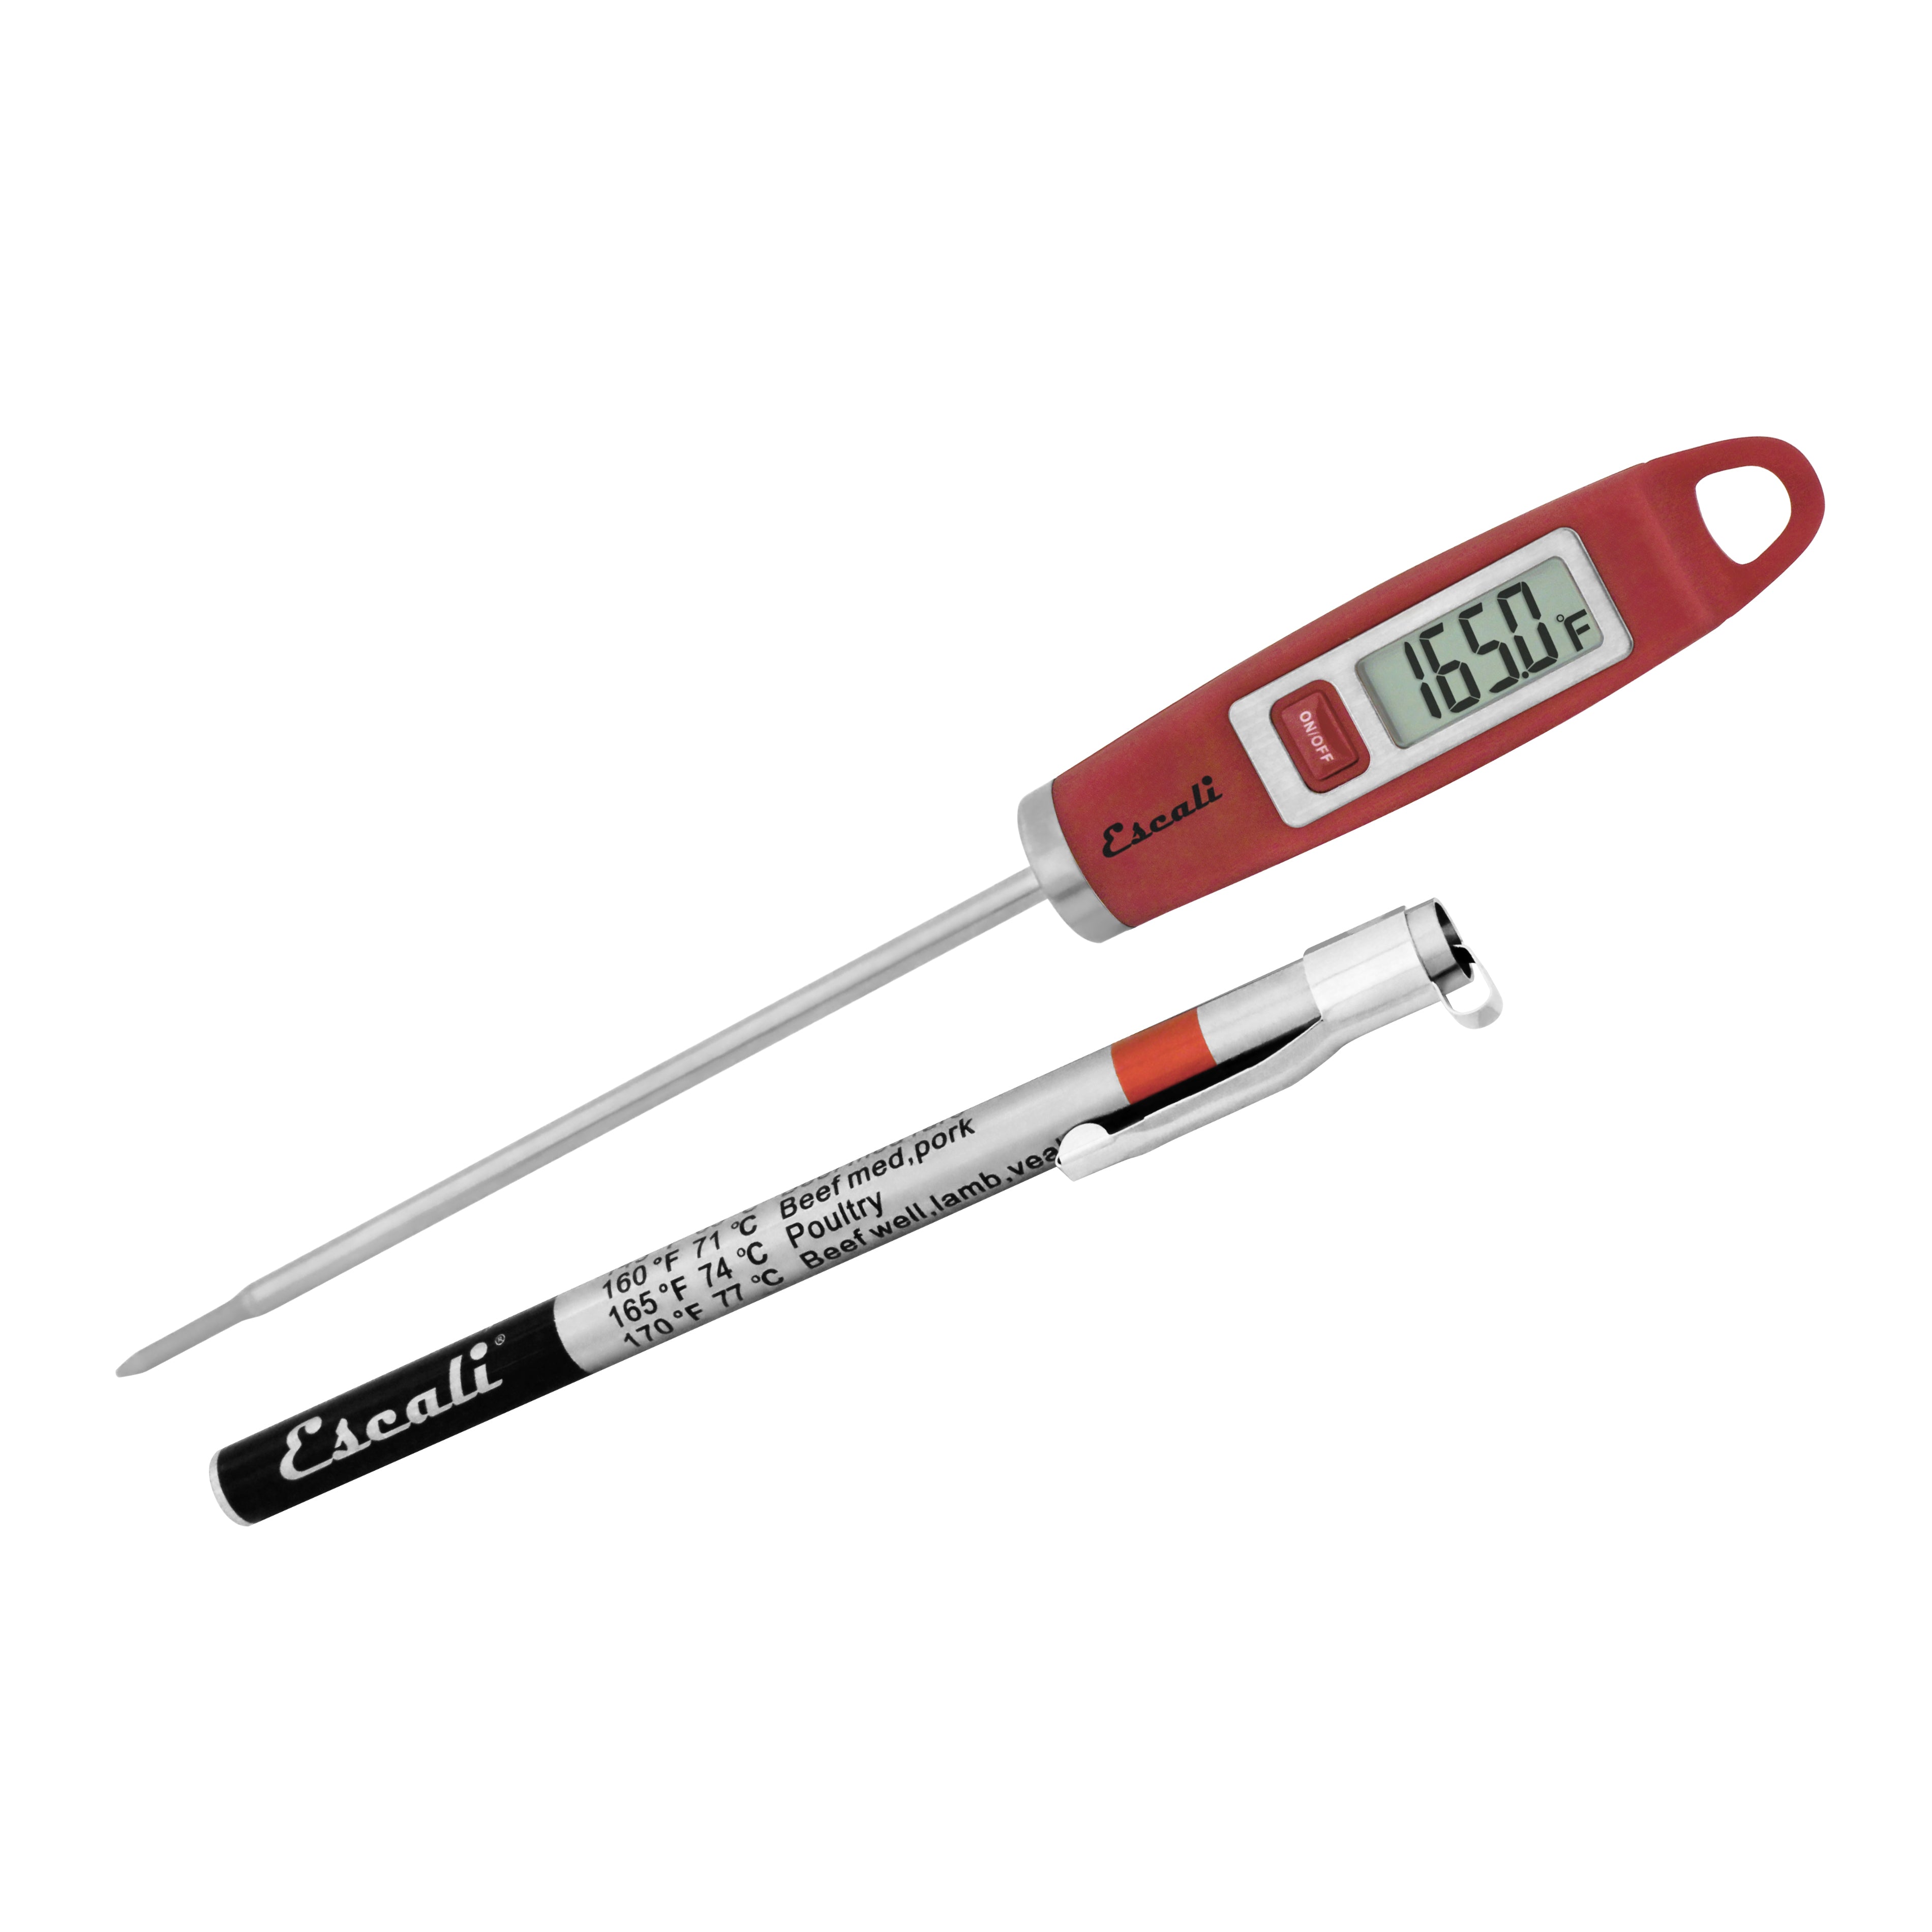 A photo of a red DH1 Gourmet Digital Thermometer on a white background